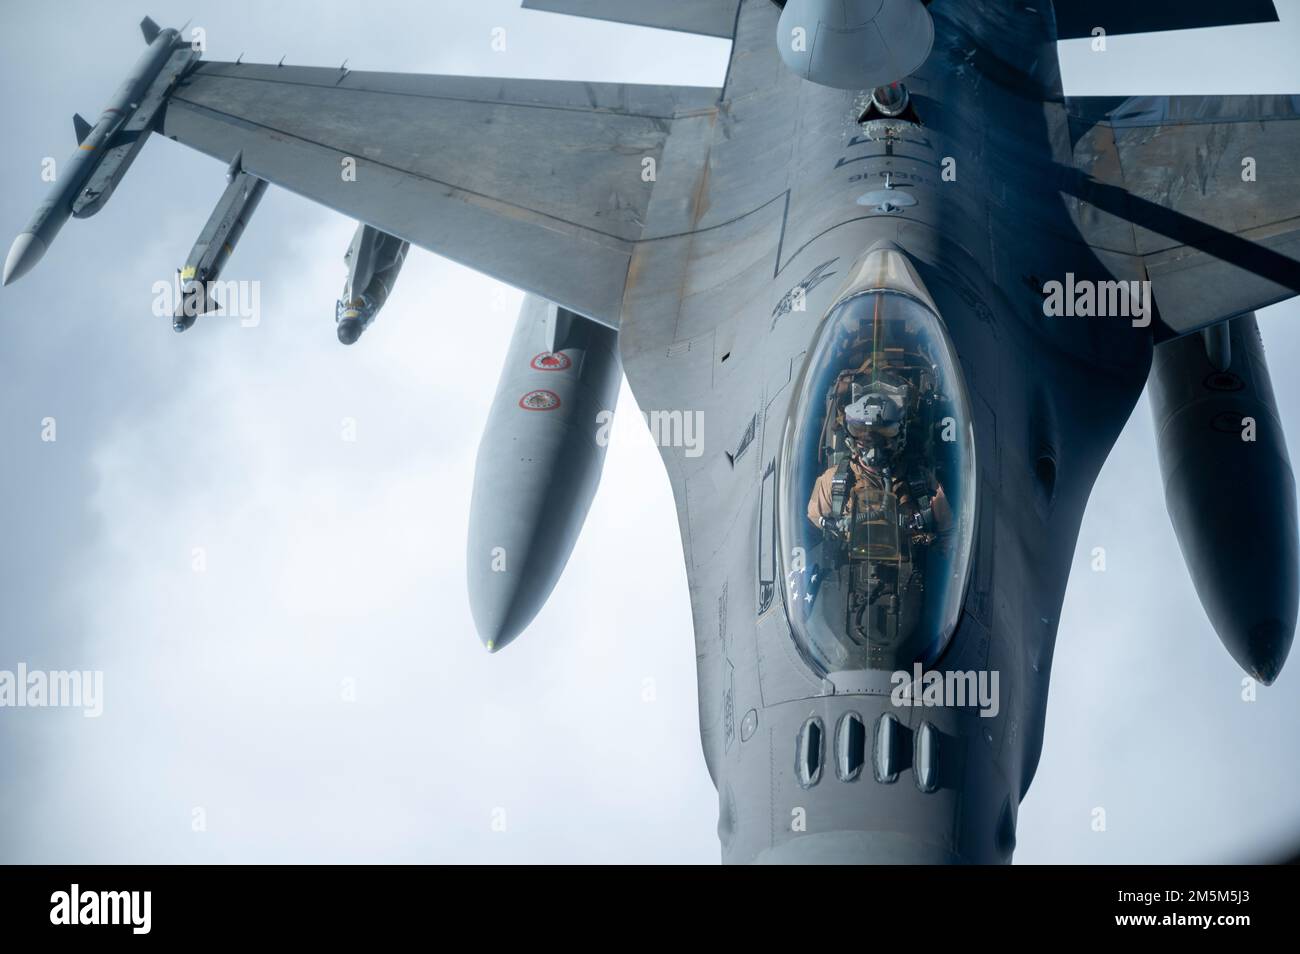 A U.S. Air Force F-16 Fighting Falcon pilot receives fuel from a U.S. Air Force KC-135 Stratotanker over the U.S. Central Command area of responsibility March 24th, 2022. The F-16 Fighting Falcon delivers airpower and showcases Ninth Air Force (Air Forces Central)’s commitment to security and stability in the USCENTCOM AOR. Stock Photo